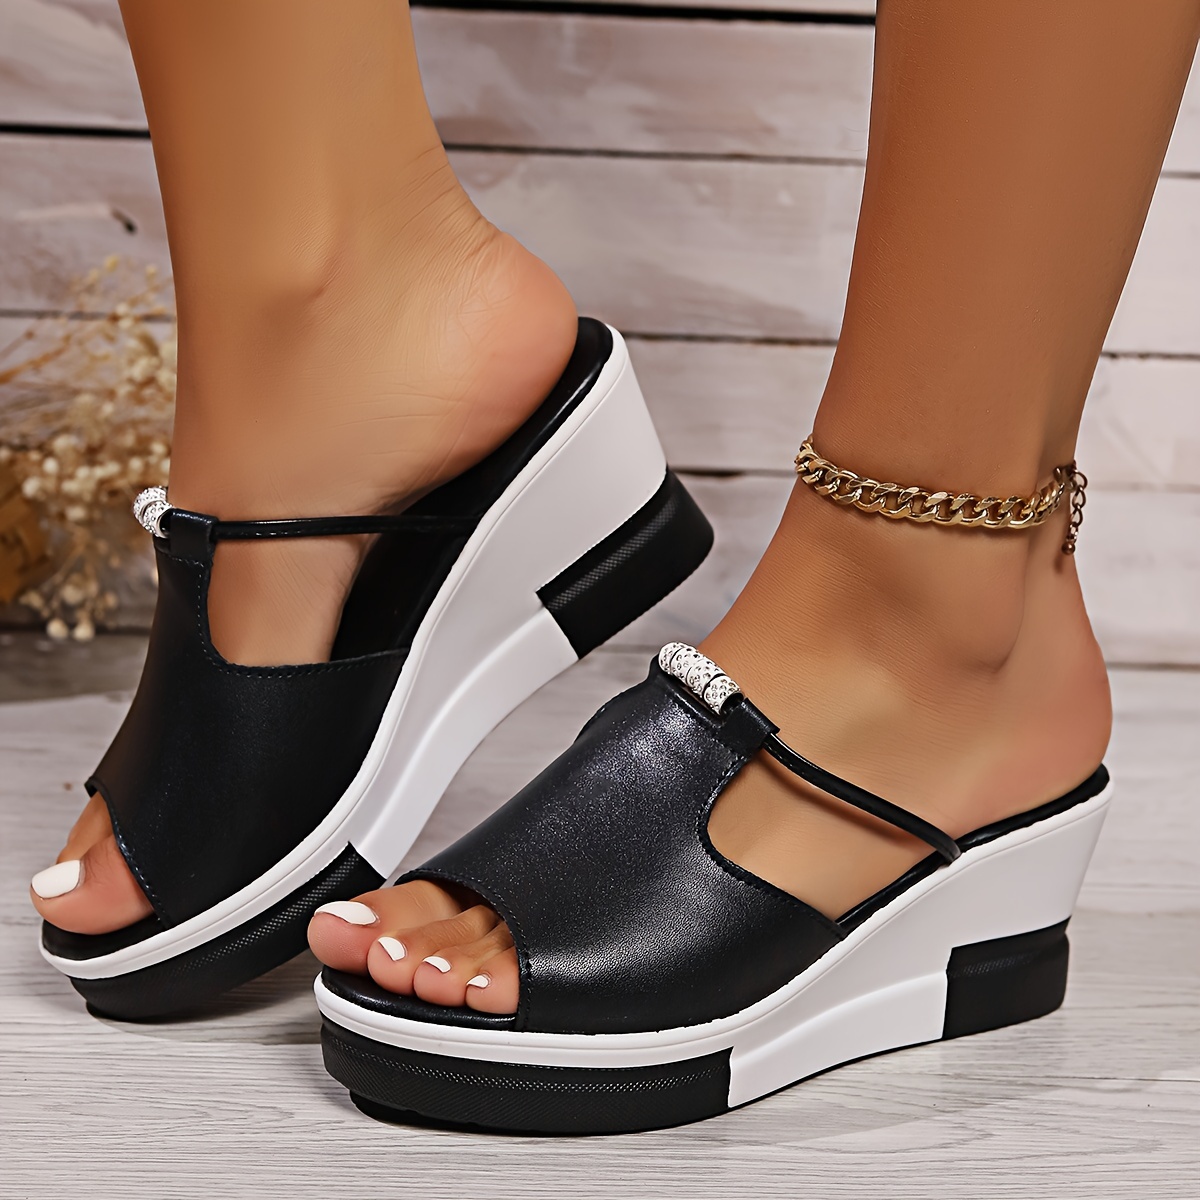 🔥Last Day Sale 69%🔥 Comfortable Orthopedic Platform Sandals for Wome